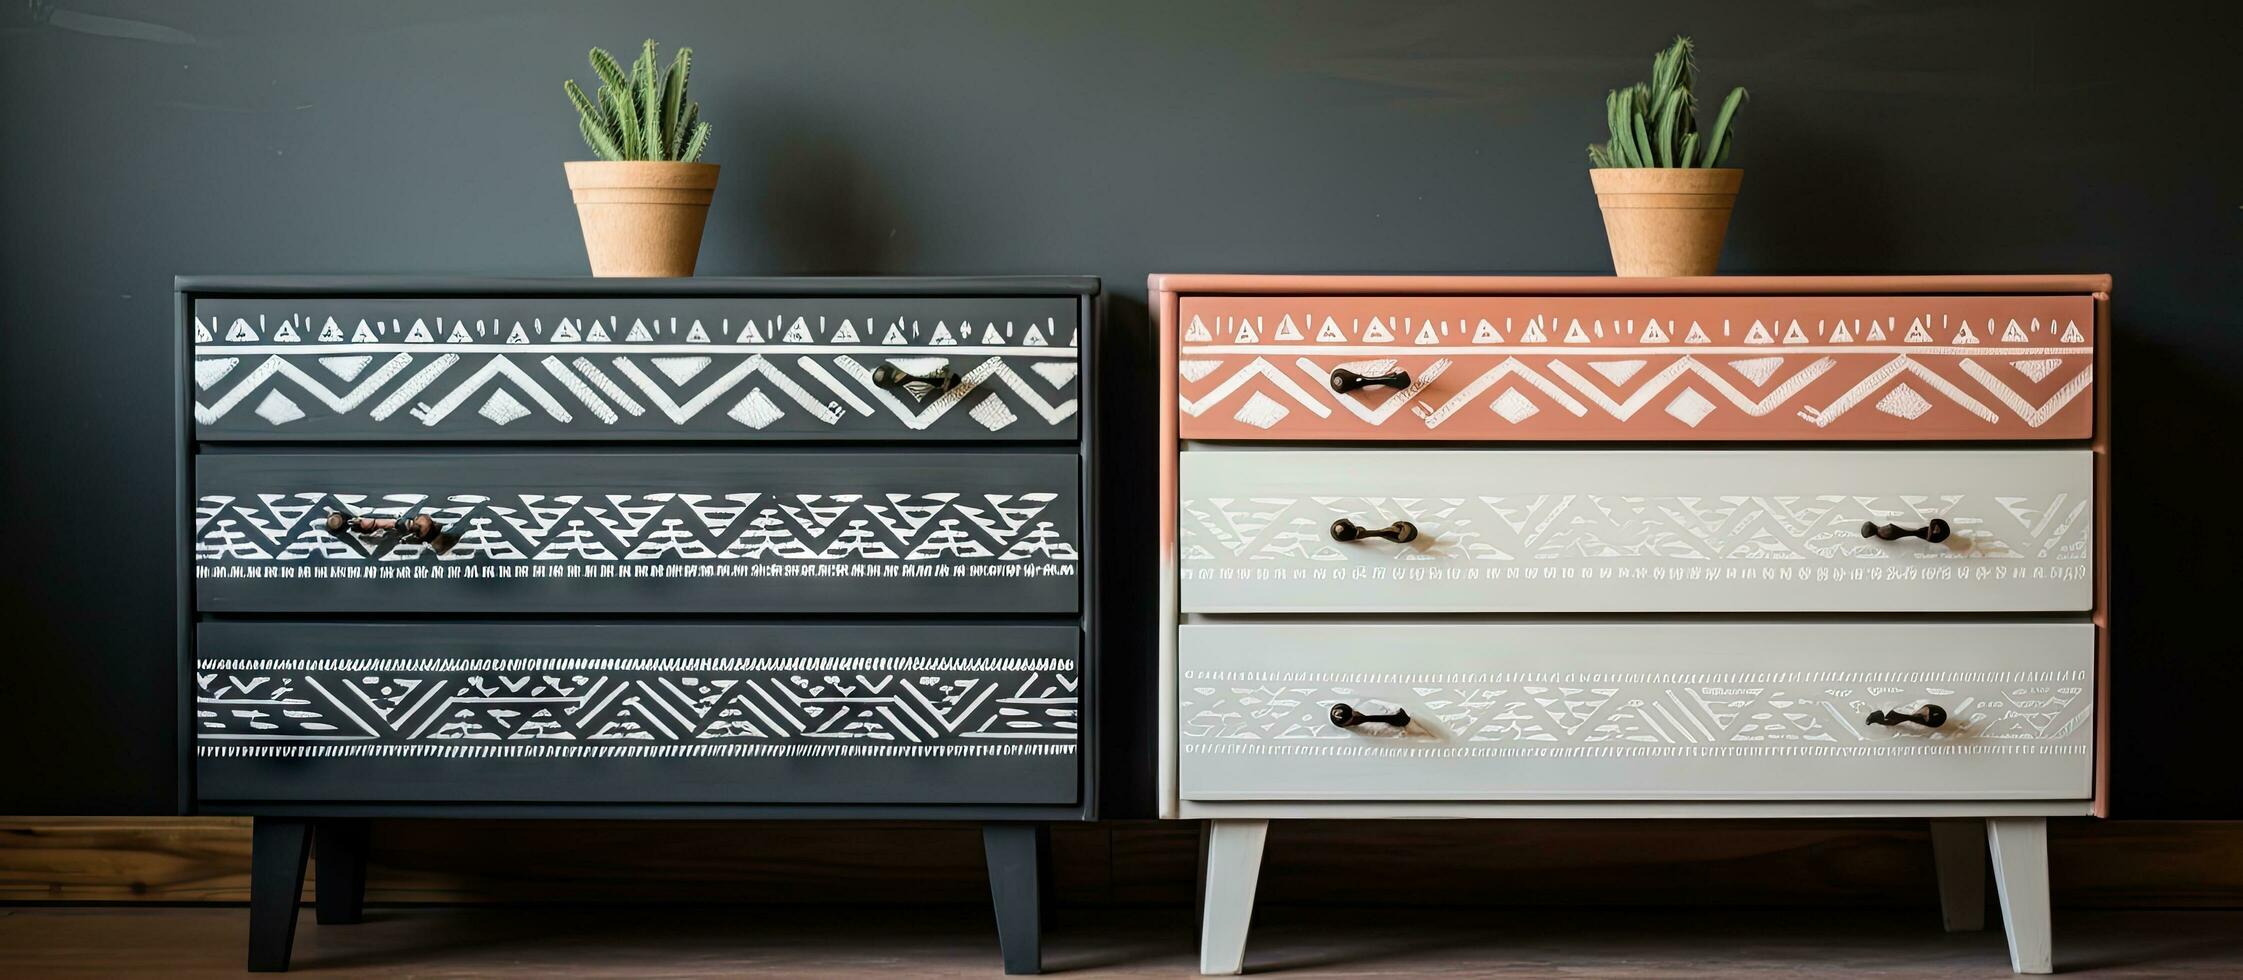 Bohemian chic dresser with stenciled design and mid century modern pulls featuring drawers for the home interior photo